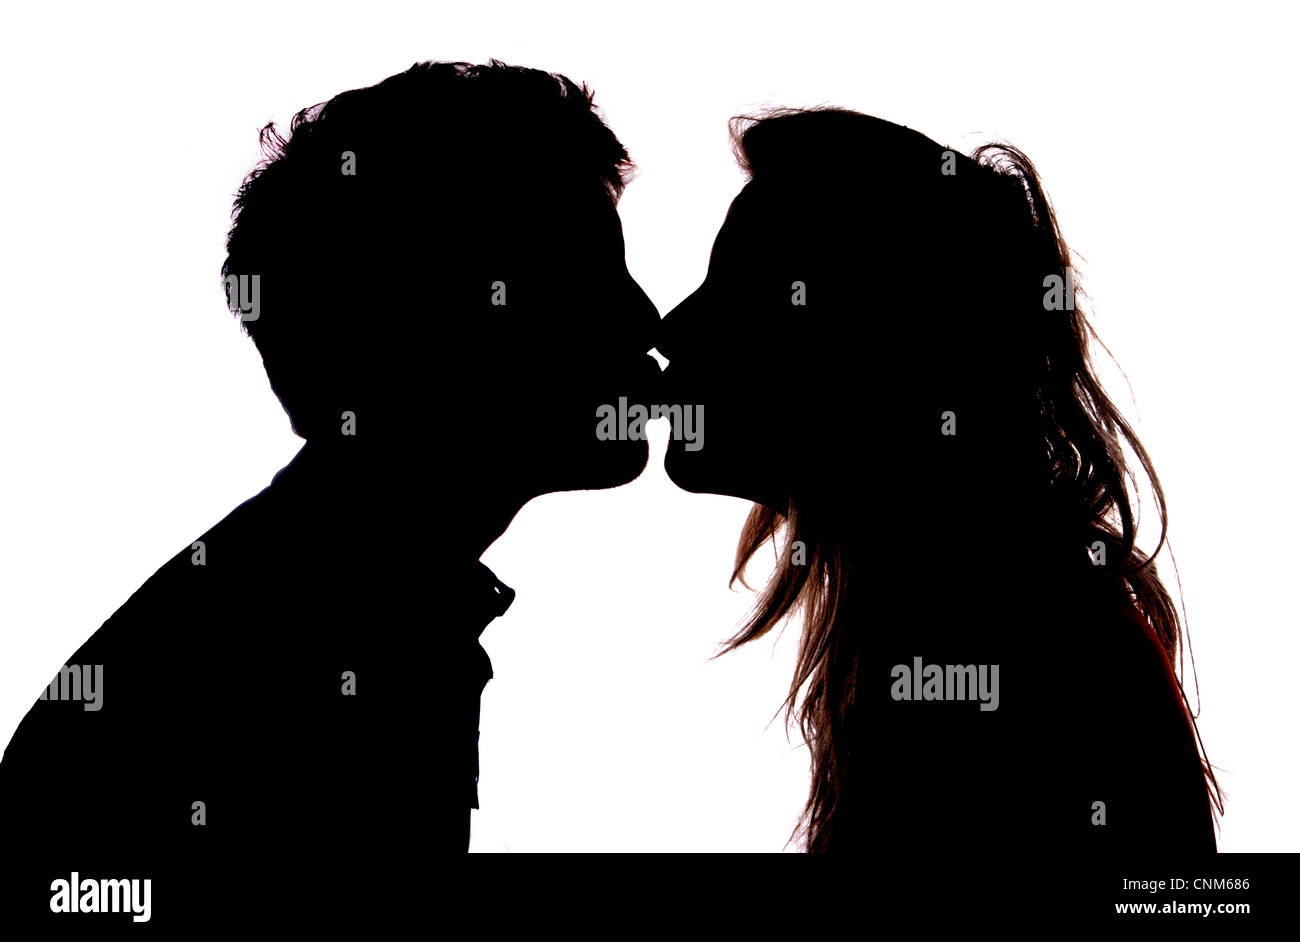 Couple Kissing Silhouette On White Background Stock Photo Royalty